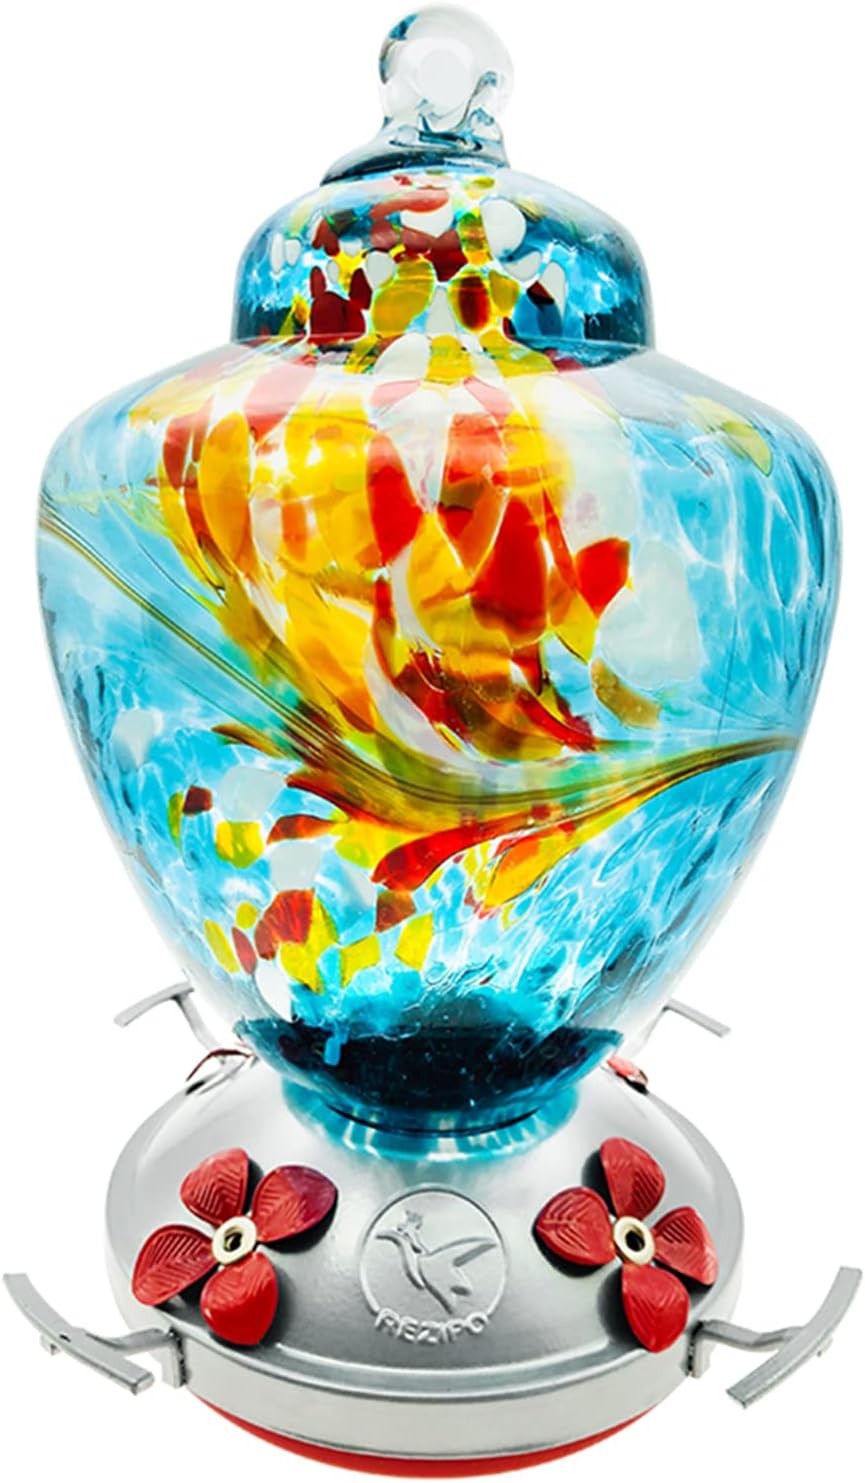 Hummingbird Feeder with Perch - Hand Blown Glass - Blue - 38 Fluid Ounces Hummingbird Nectar Capacity Include Hanging Wires and Moat Hook